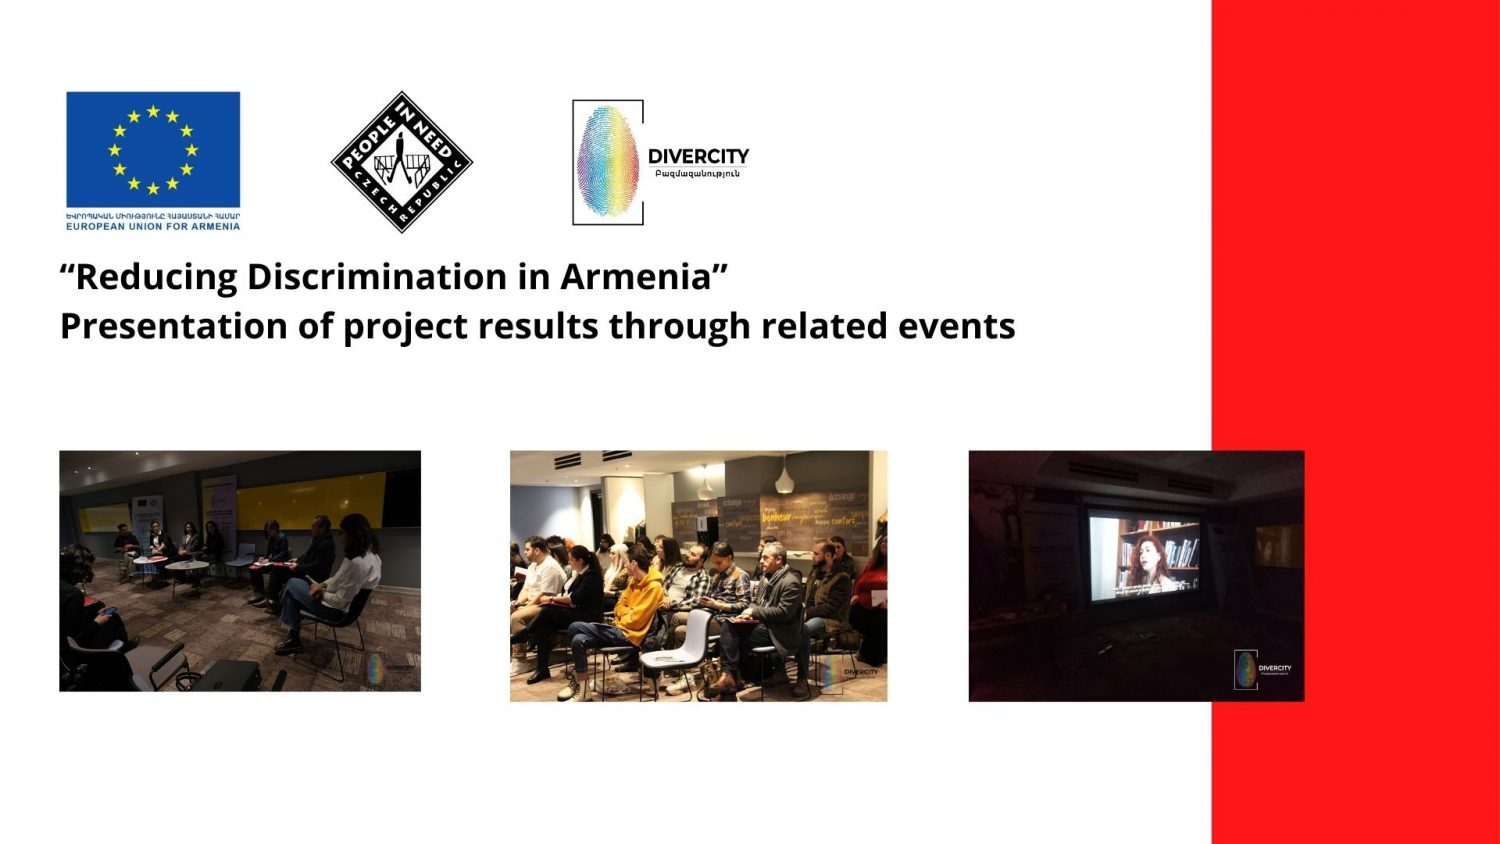 The presentation of the results of “Reducing Discrimination in Armenia” project